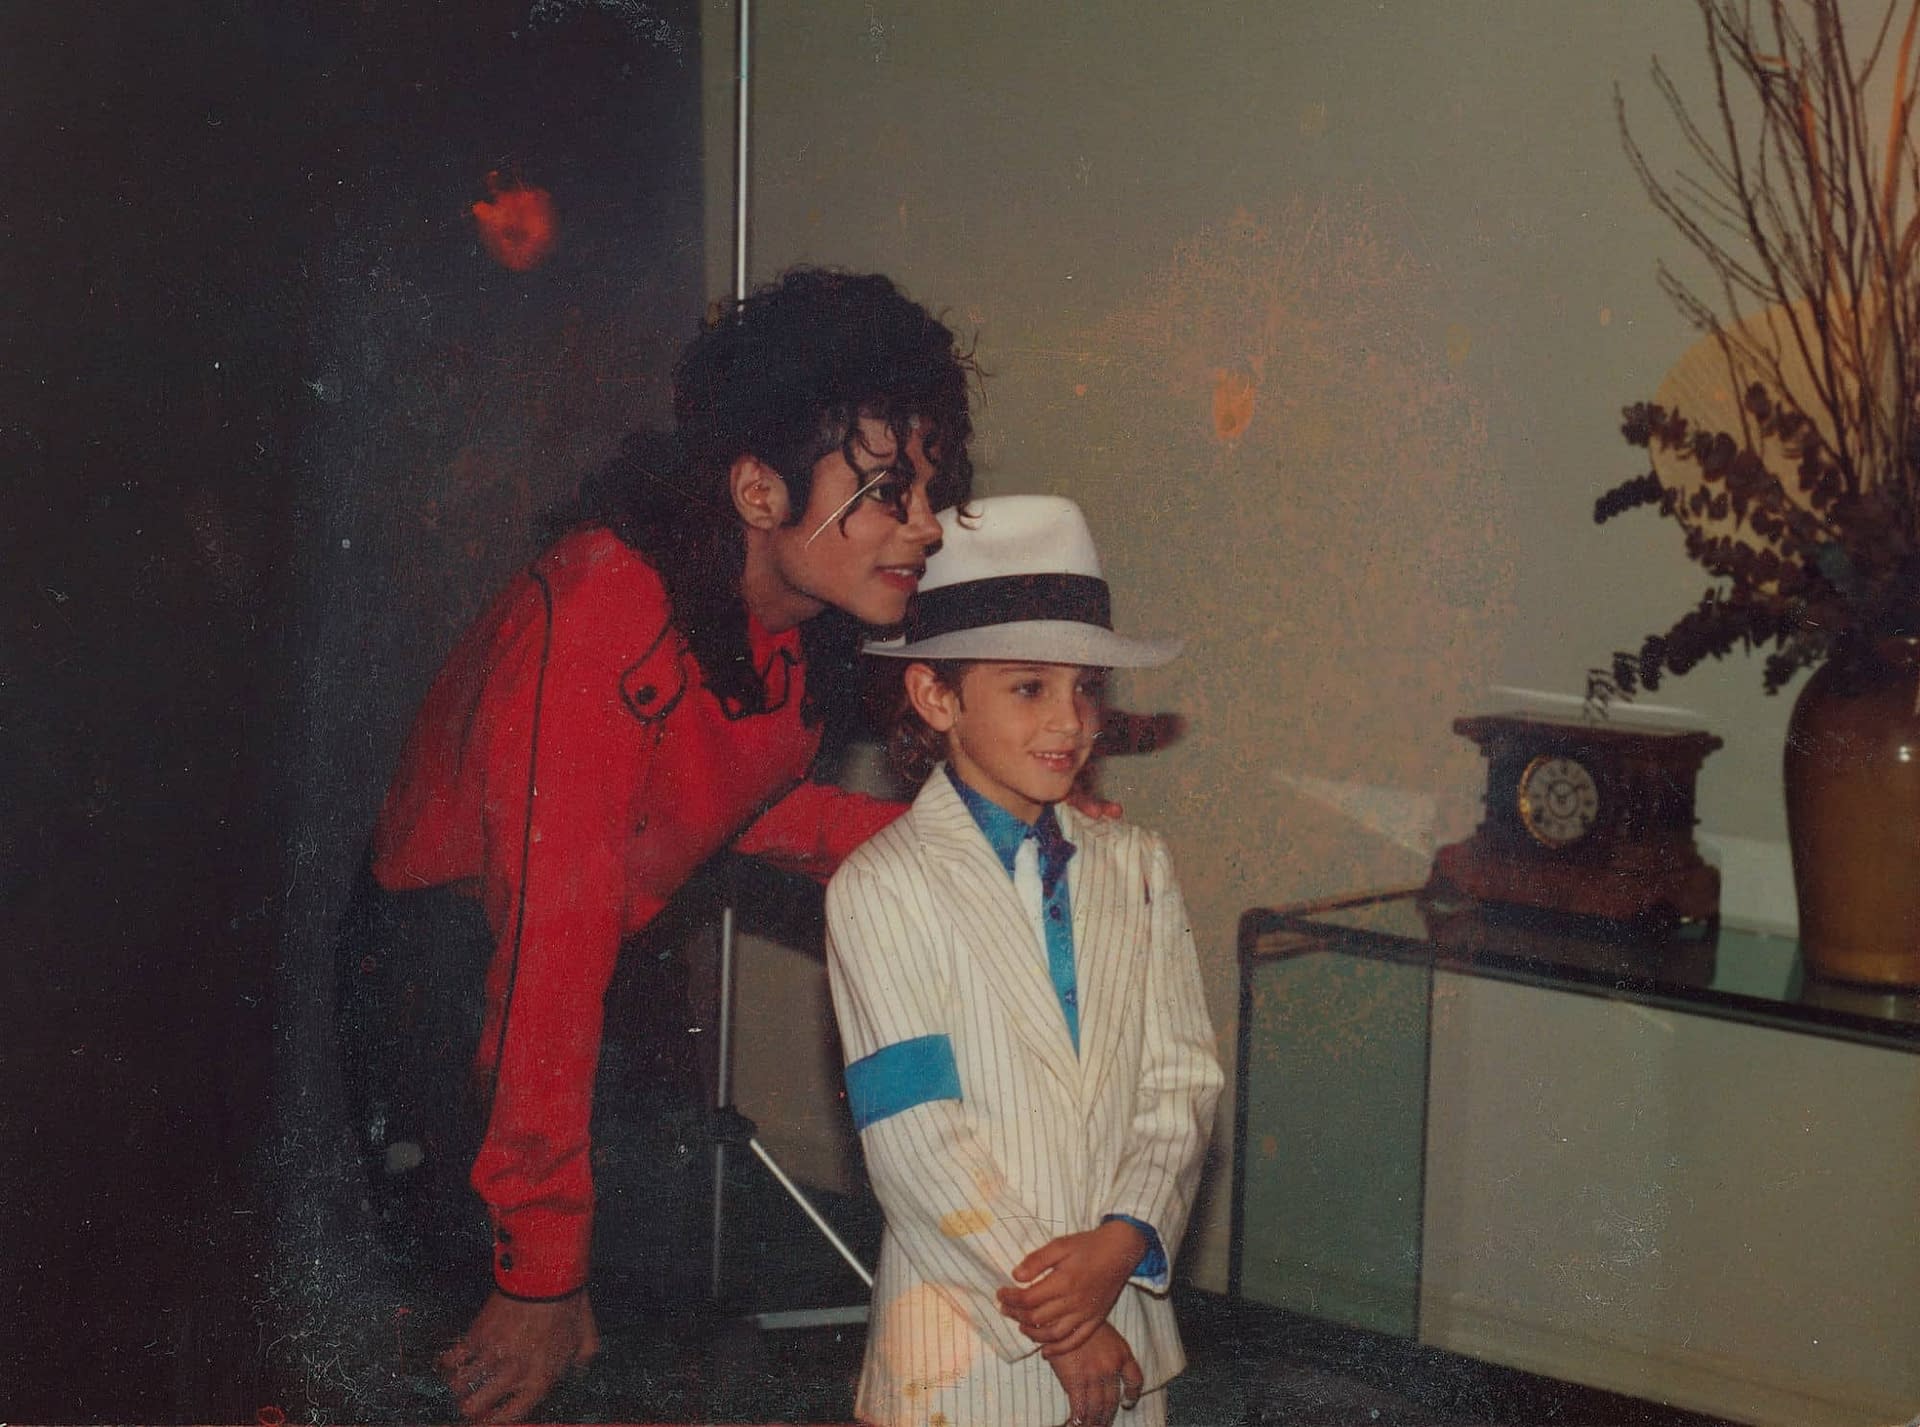 Michael Jackson Documentary 'Leaving Neverland' to Air on Channel 4 in Early March